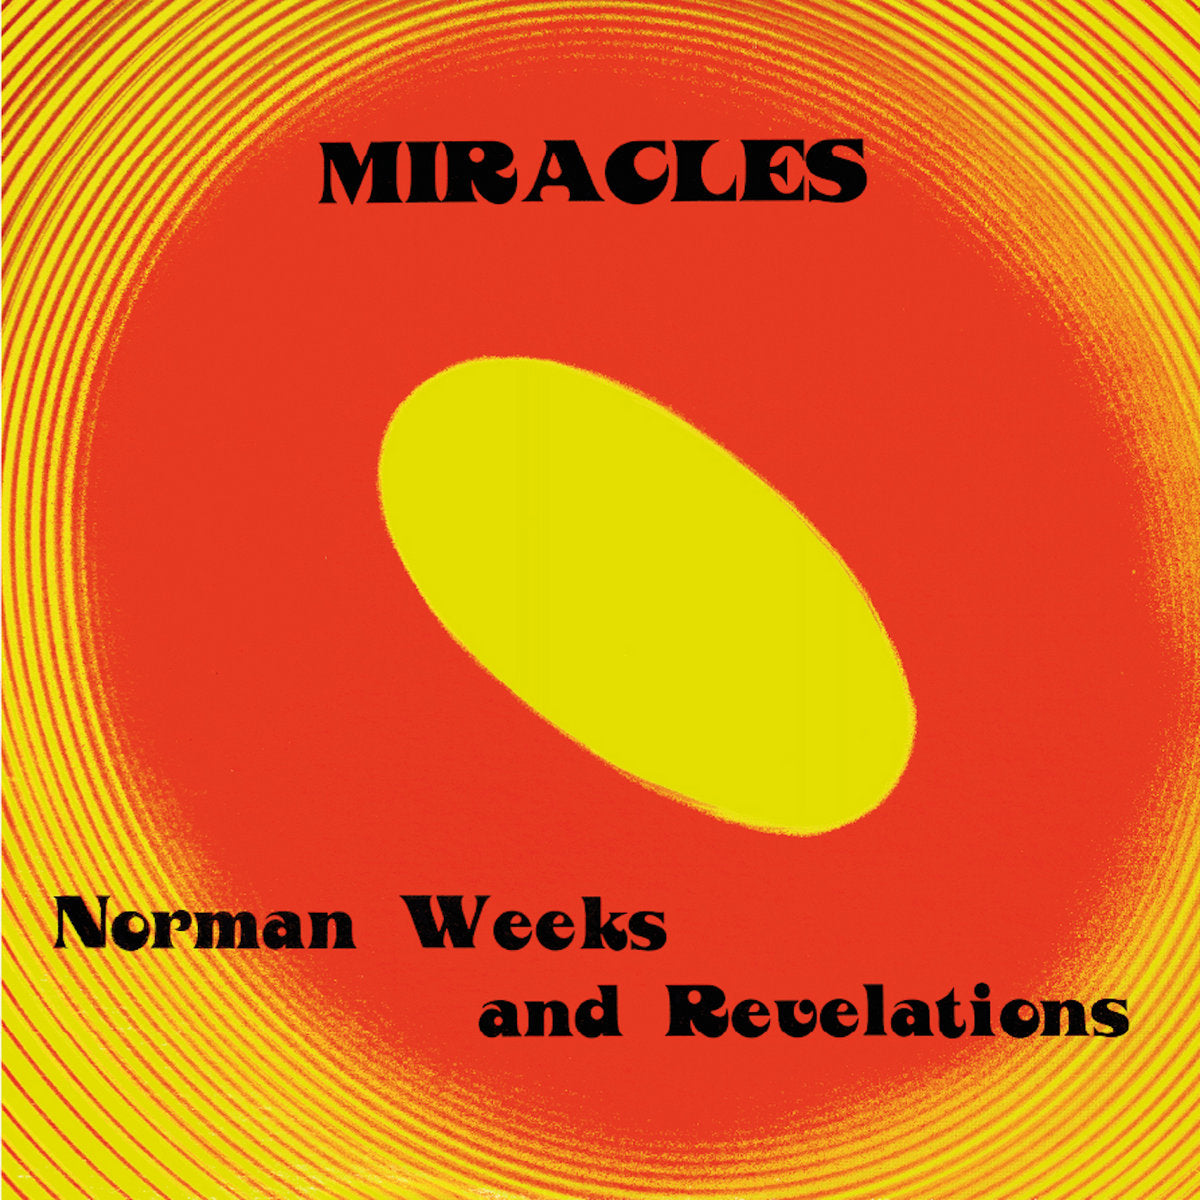 Miracles (New LP)